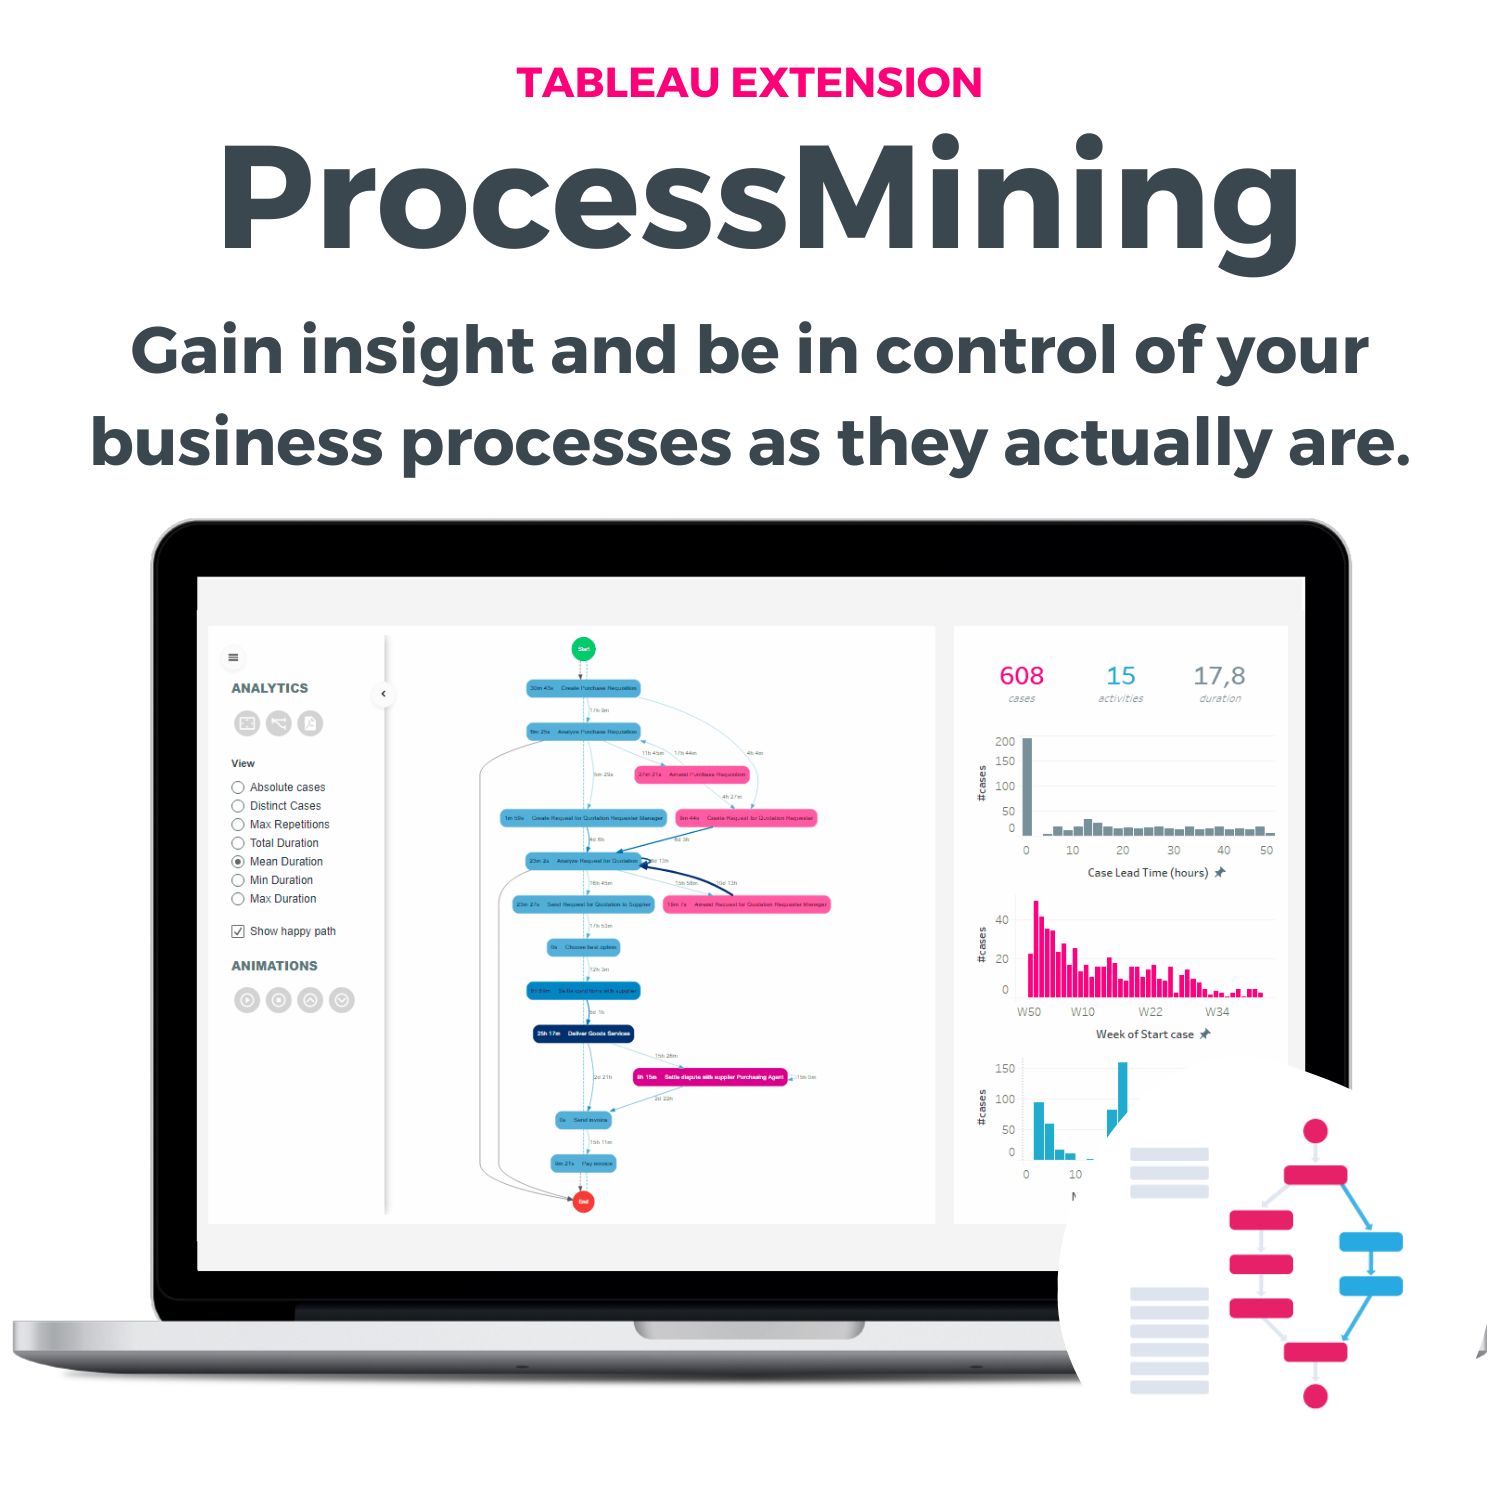 ProcessMining - Gain insight in your business processes